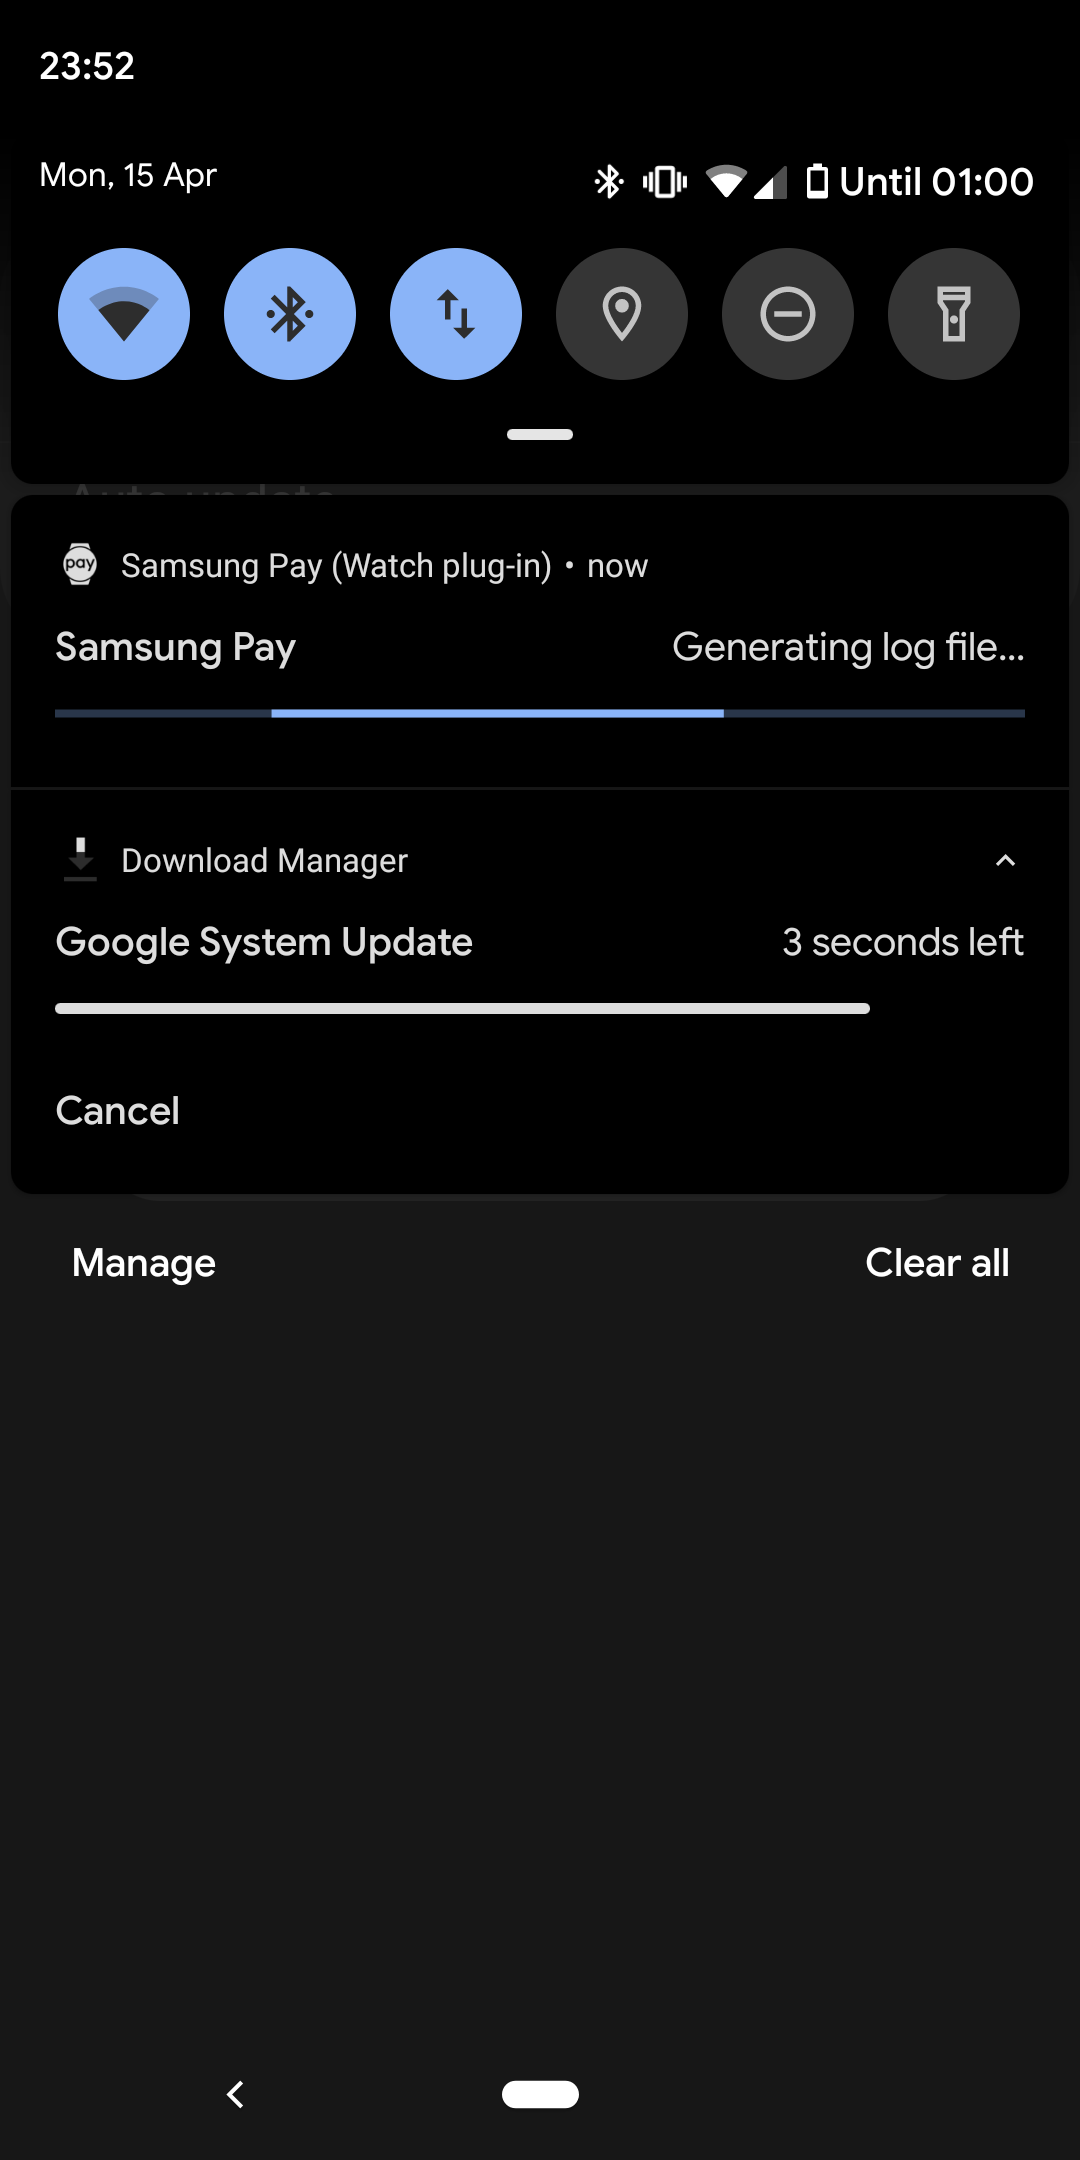 Google starts rolling out Android updates via Play Store